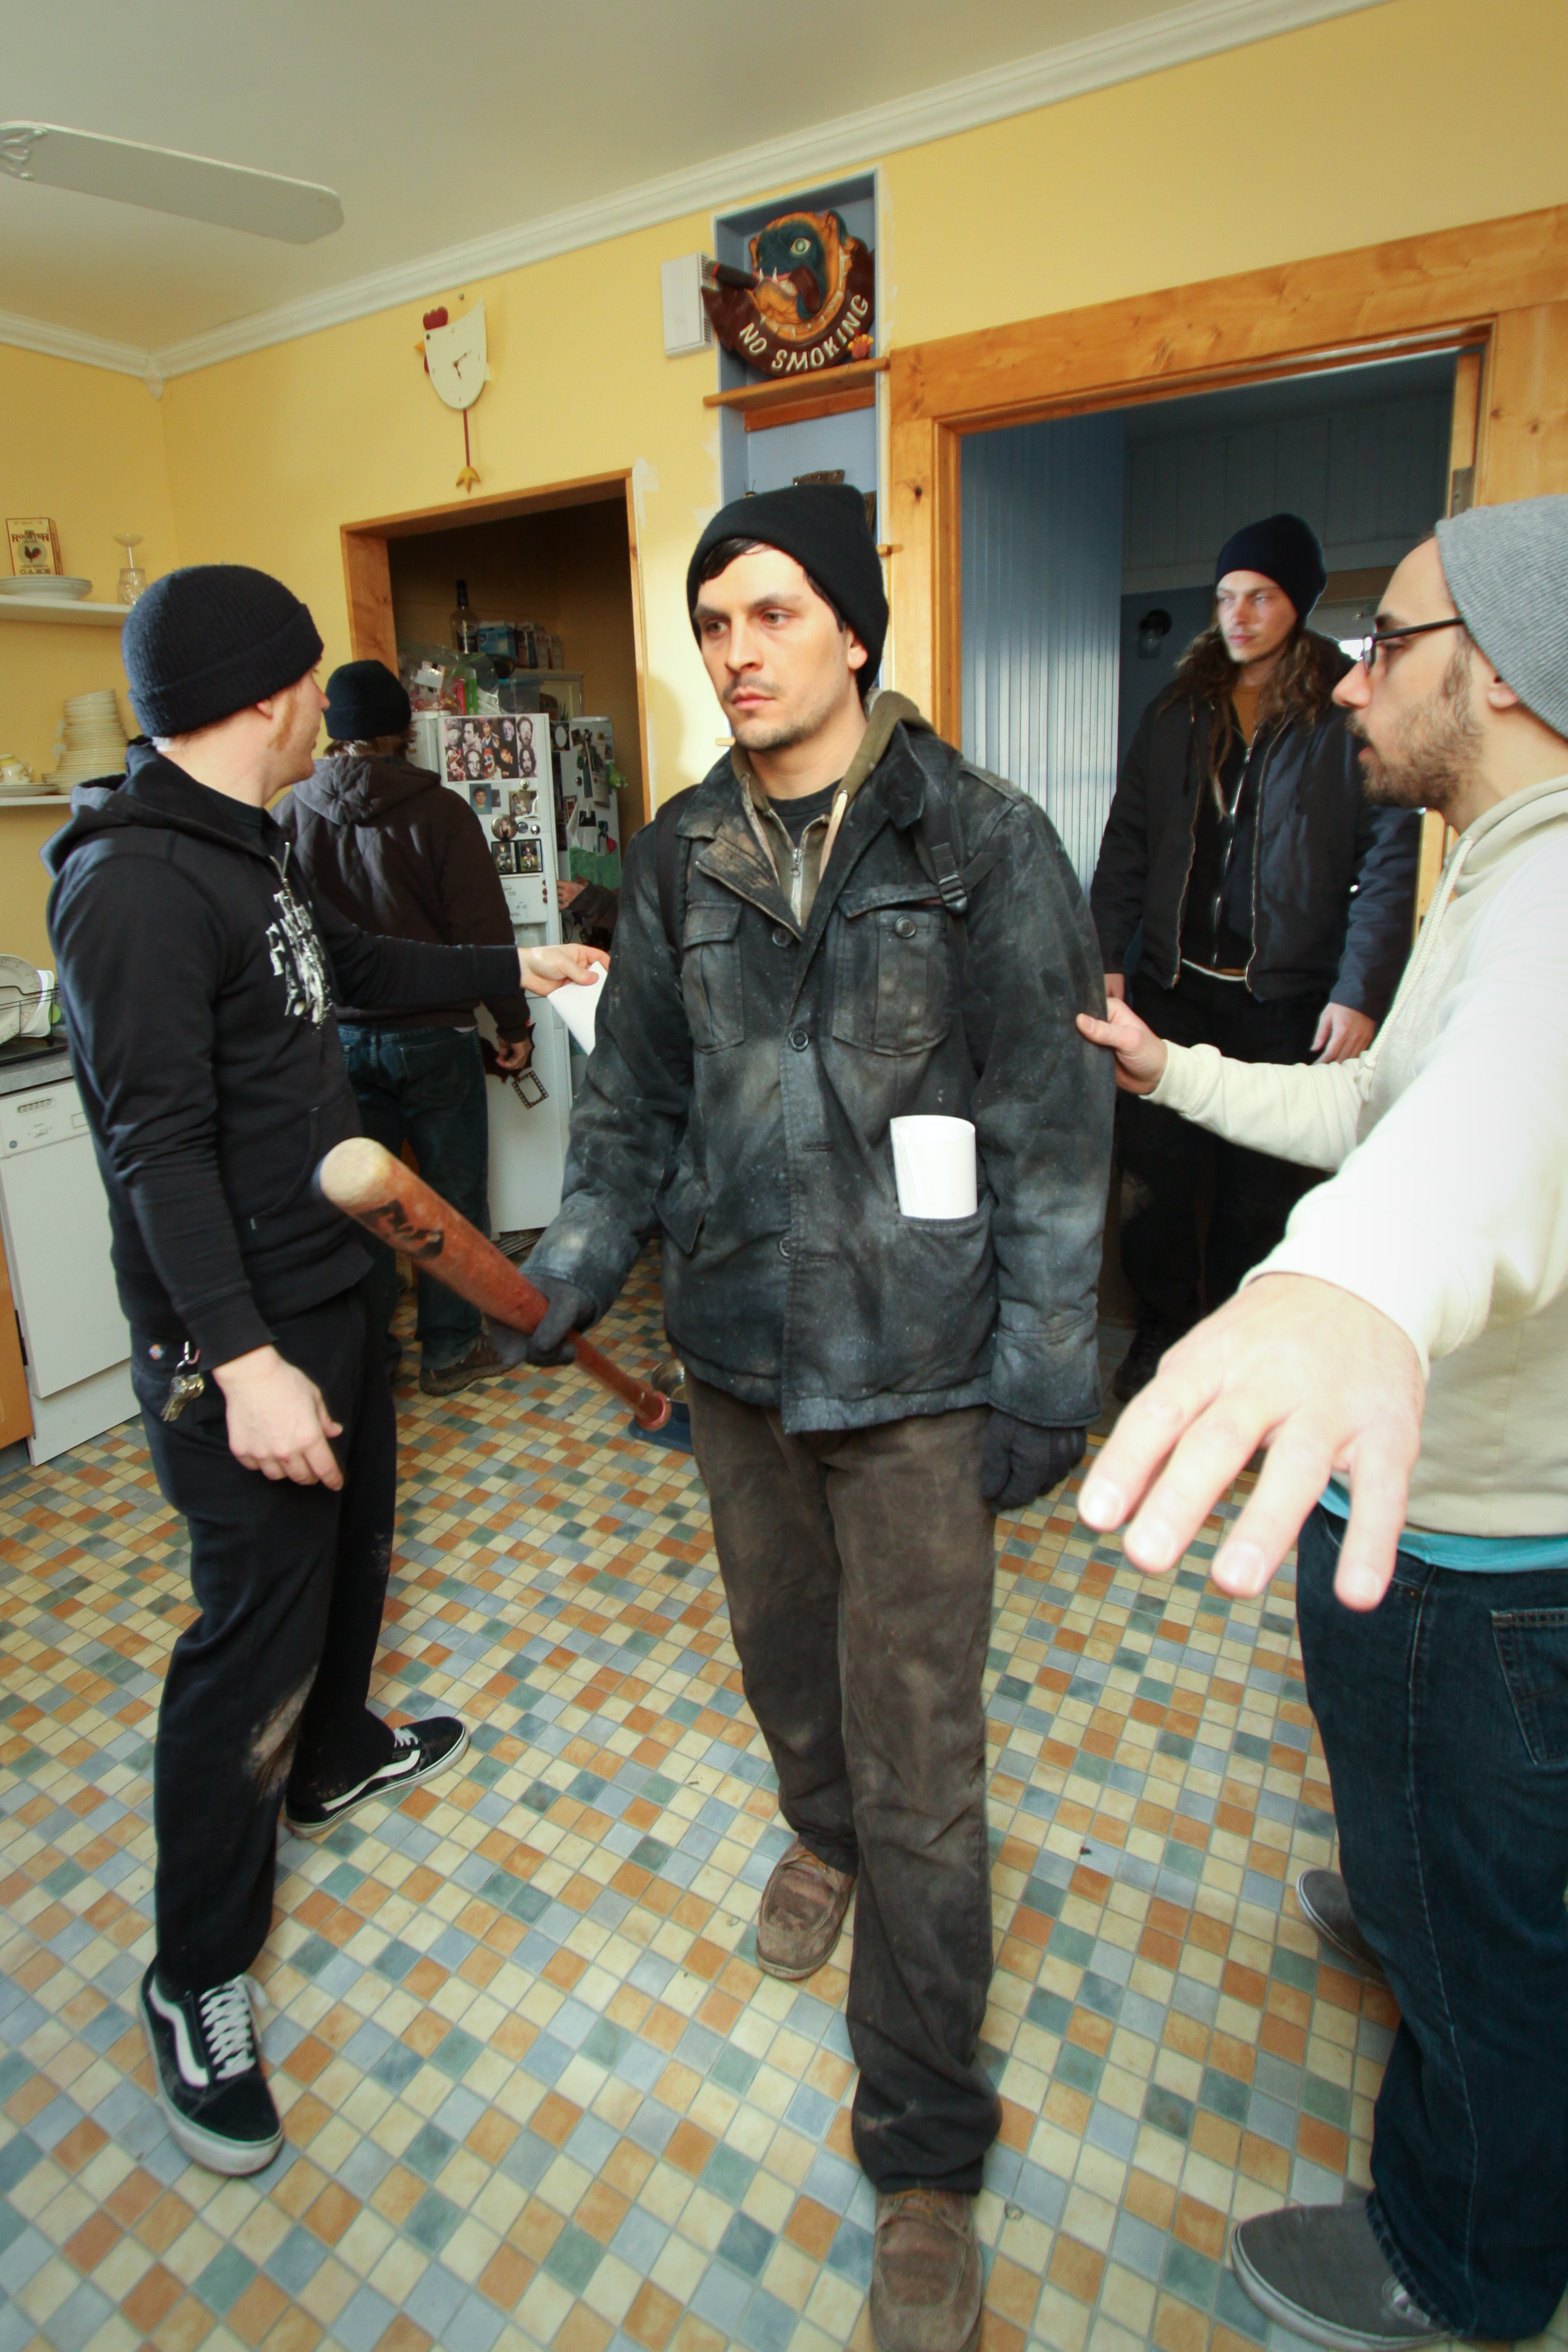 Co-writers and co-directors Adam Bartlett and John Pata walk through a scene with actors on the set of Dead Weight, second day of filming.